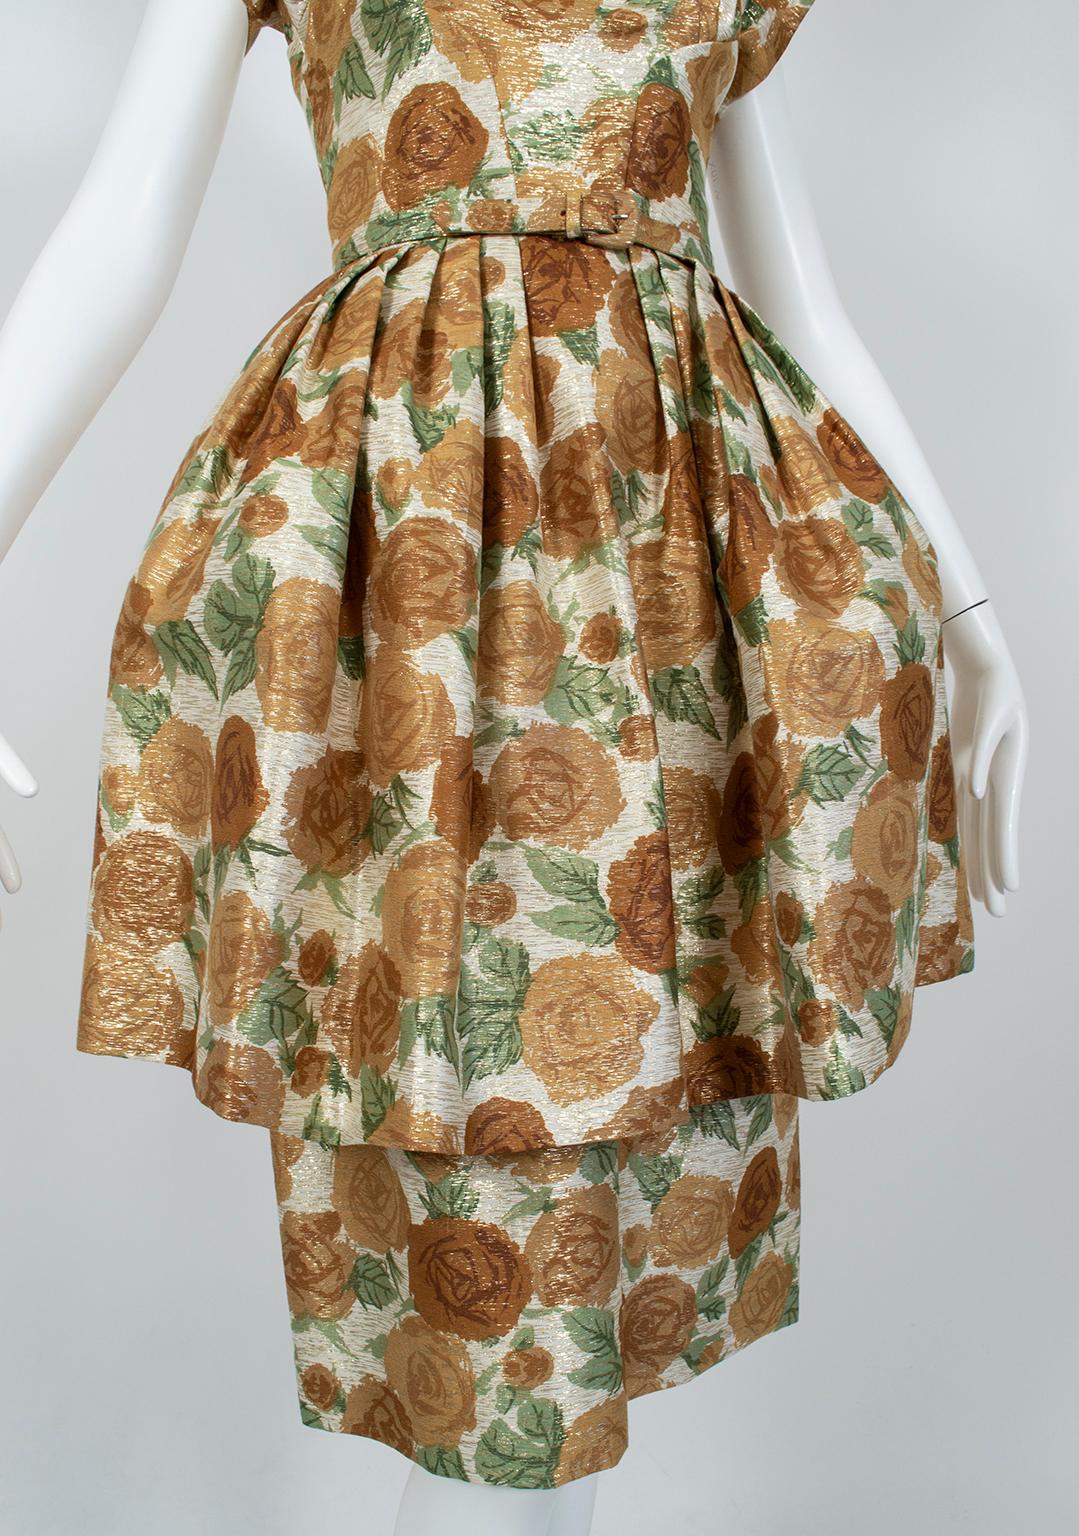 Women's Metallic Green and Gold Floral Cocktail Dress w Lampshade Hobble Skirt- S, 1950s